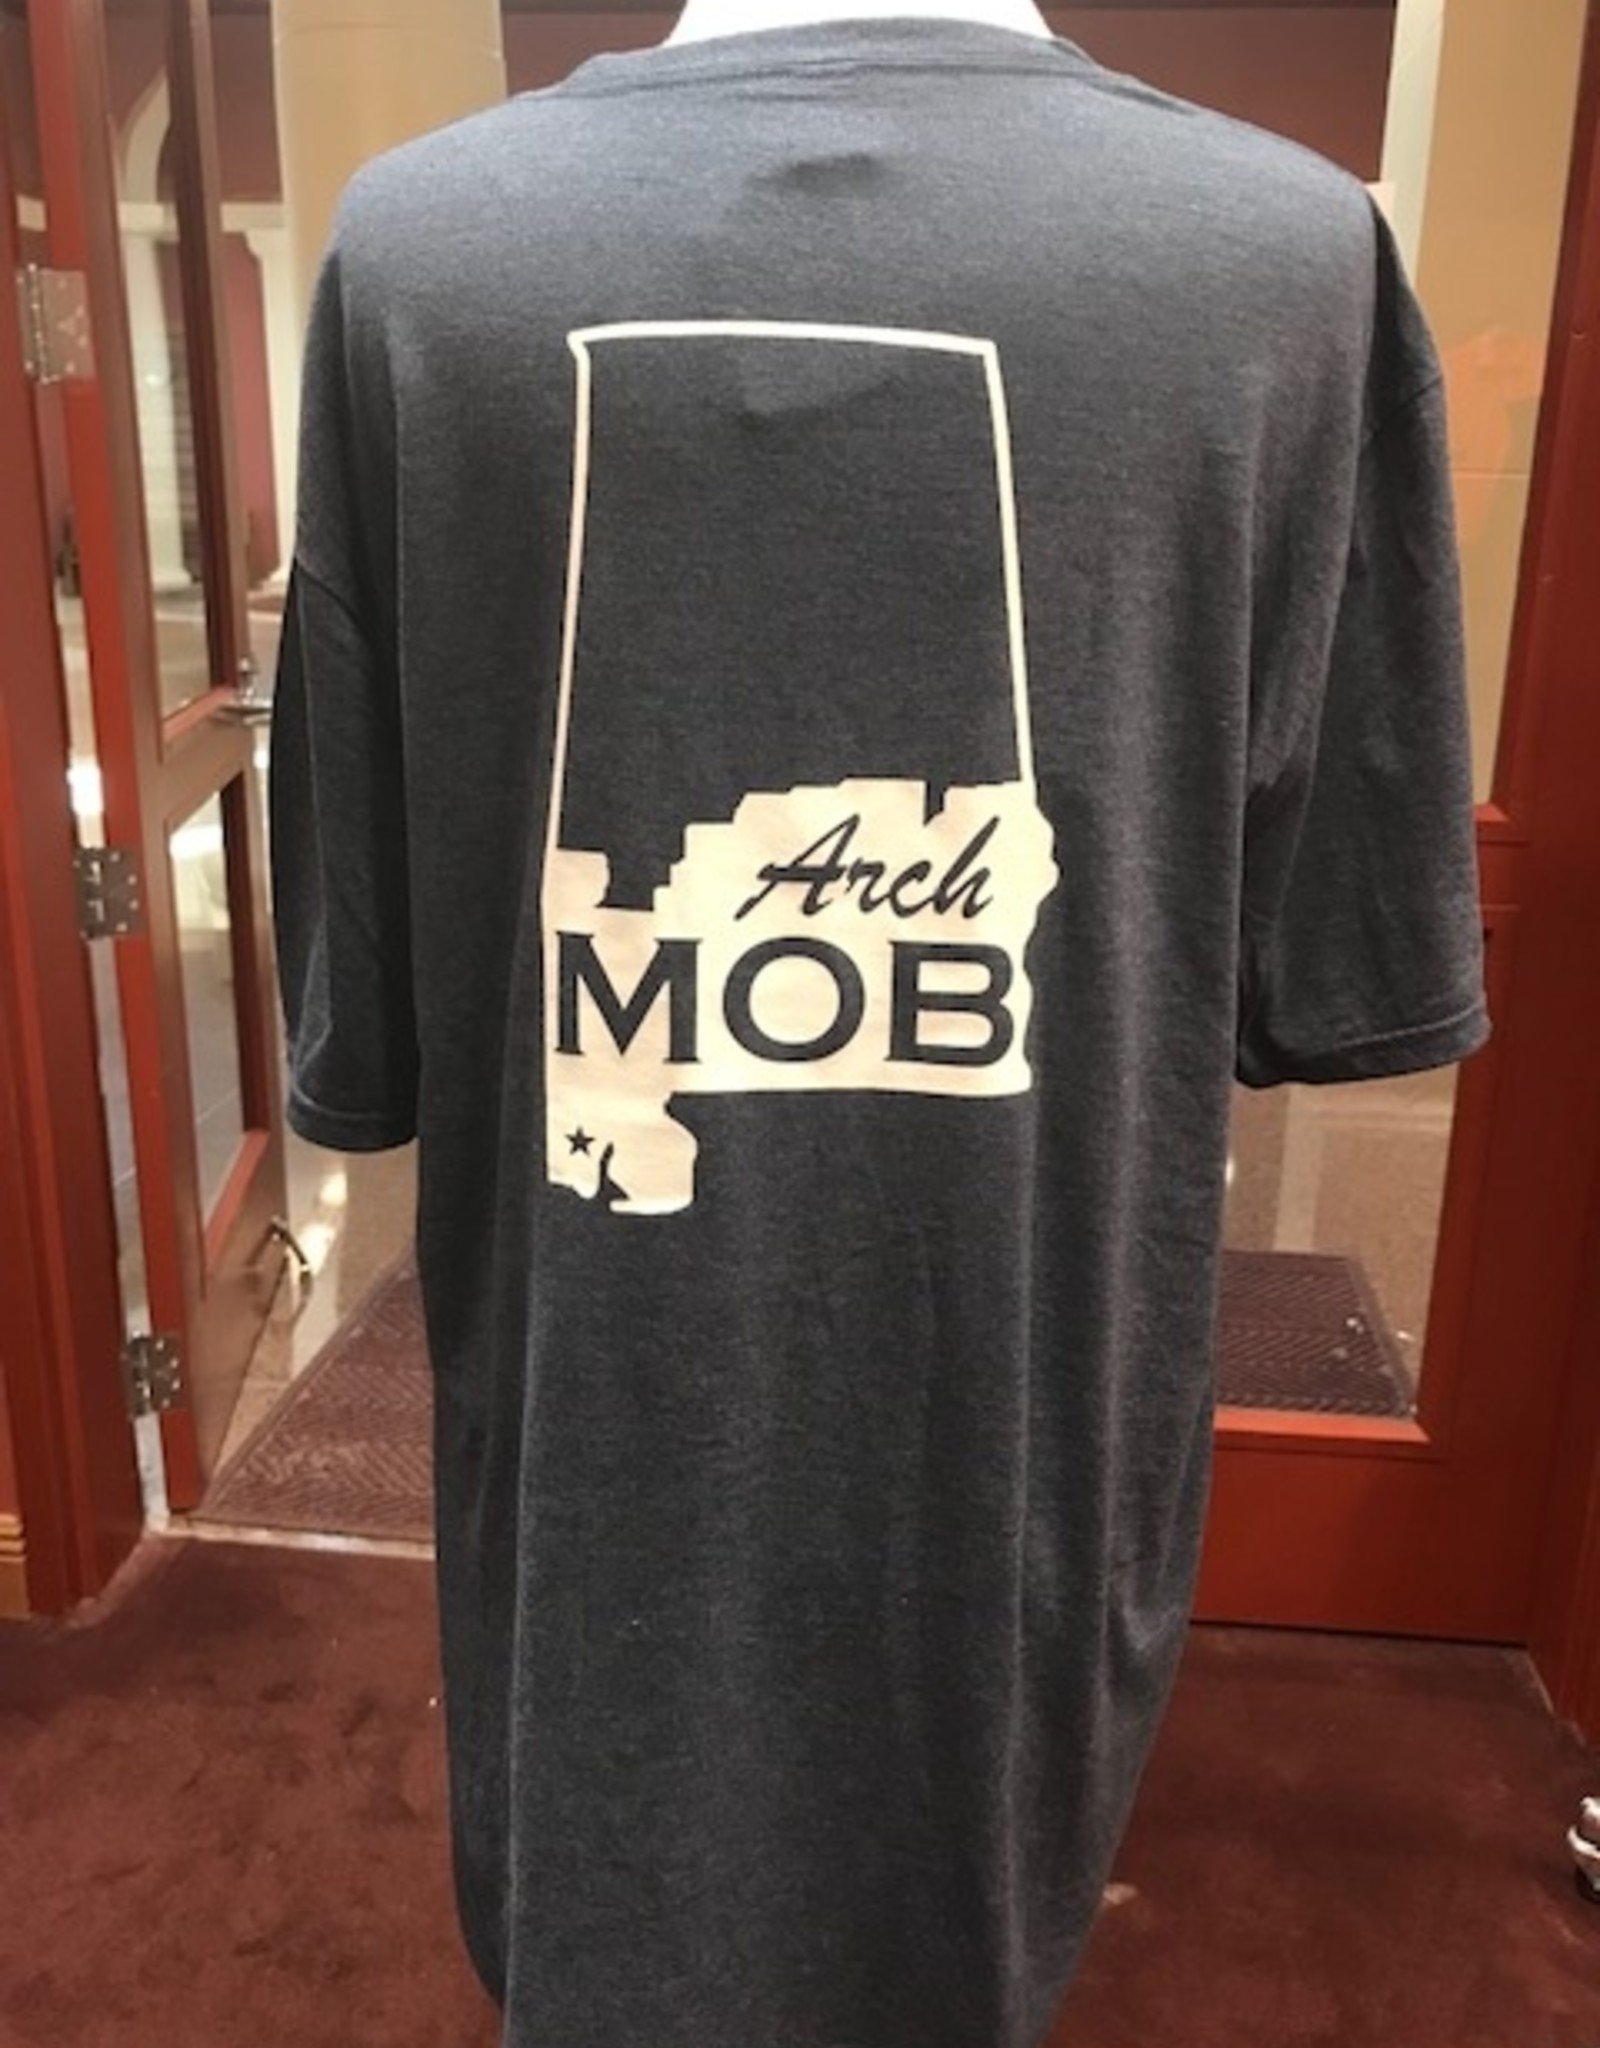 ARCH MOB T-Shirt - Adult